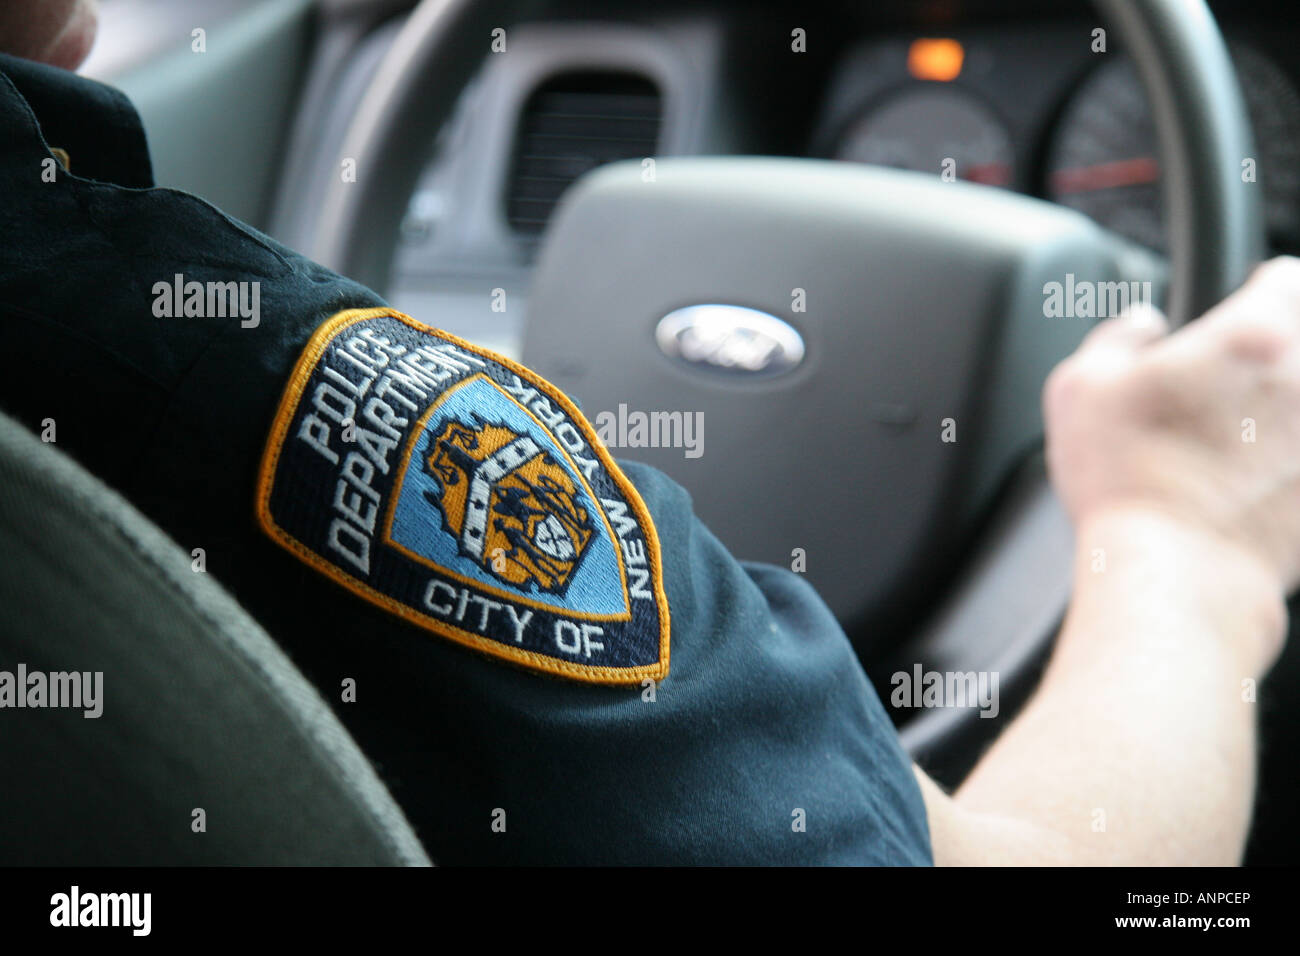 New York cop driving a police car Stock Photo